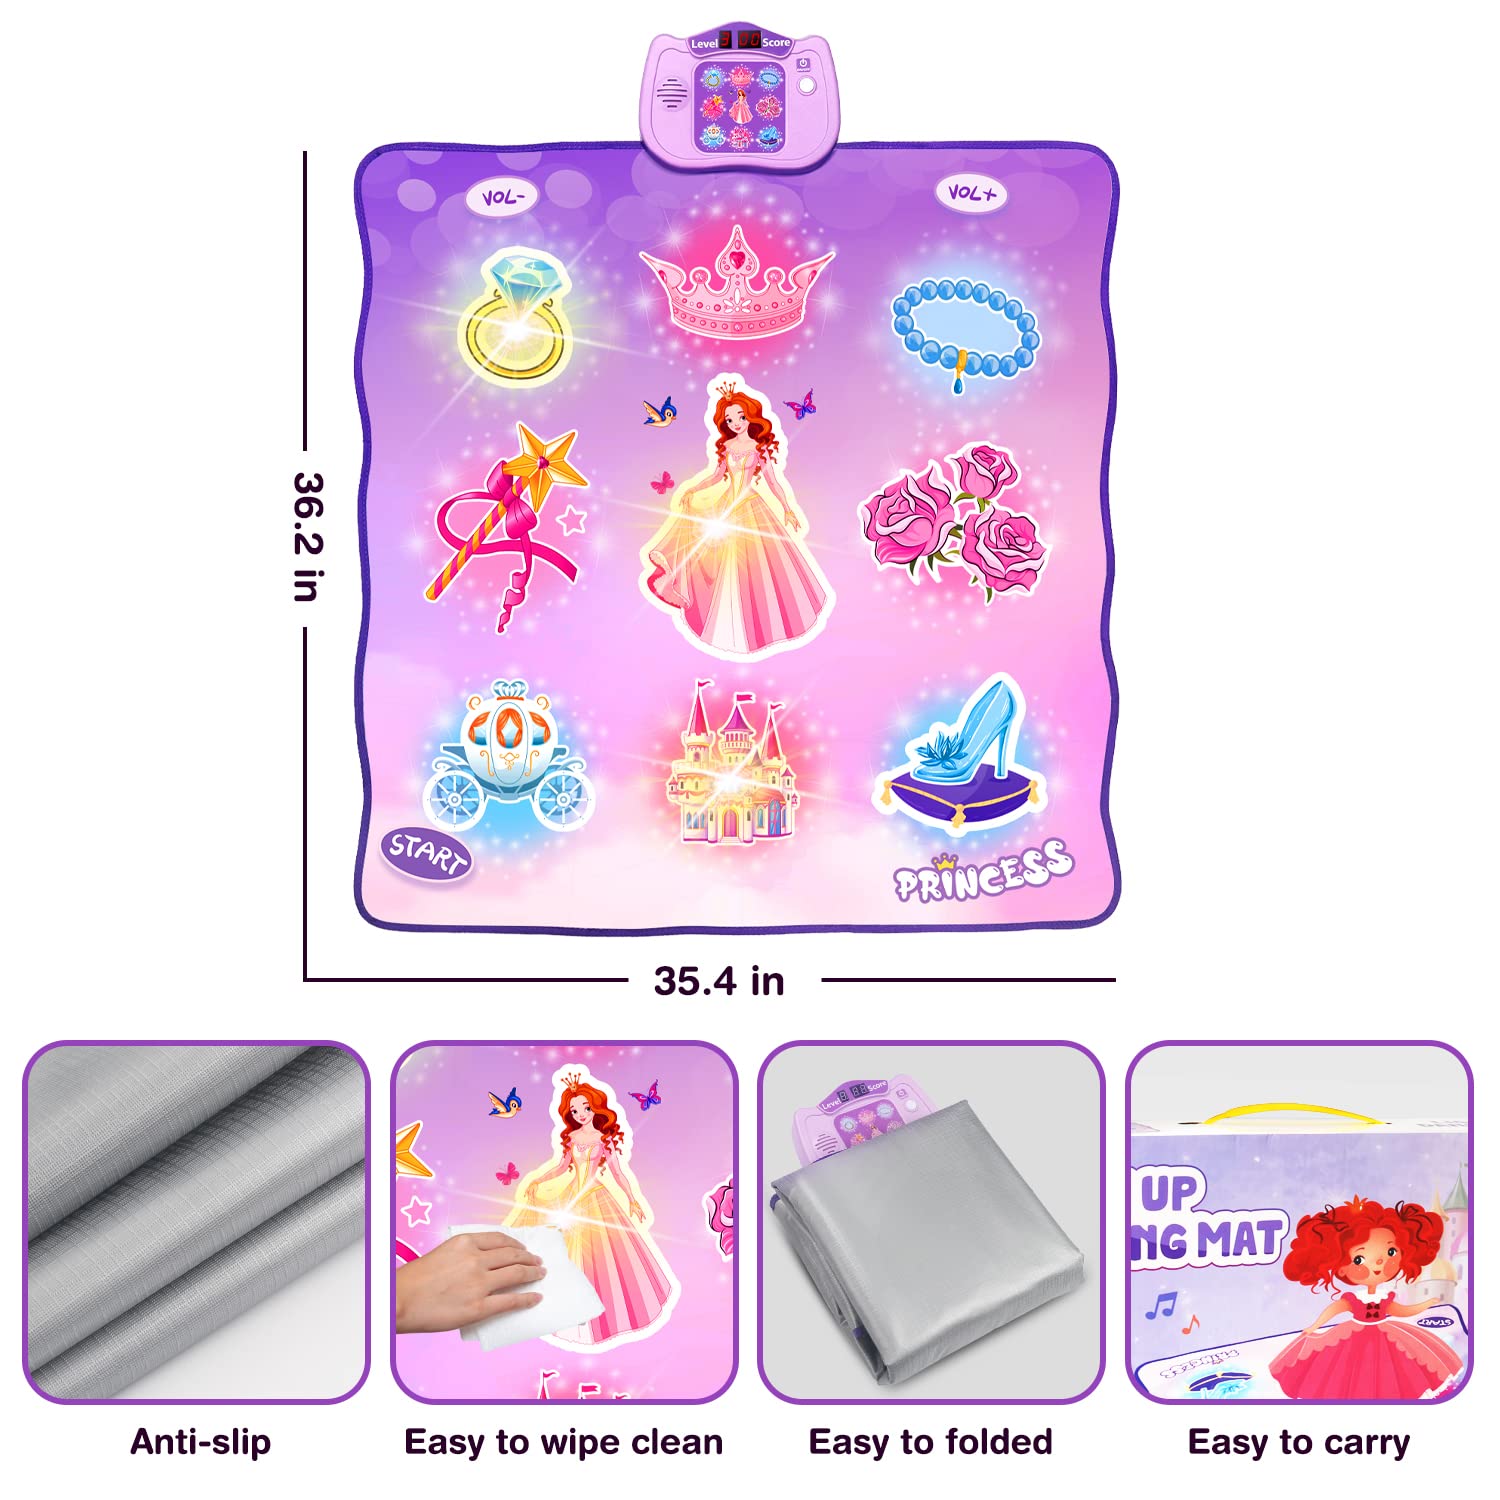 Light-Up Dance Mat Toys for 3-10 Year Old Girls, Dance Pad Toys with LED Lights, Electronic Dance Game with 3 Challenge Levels, Built-in Music, Christmas Birthday Gifts for 3 4 5 6 7 8+ Year Old Girls